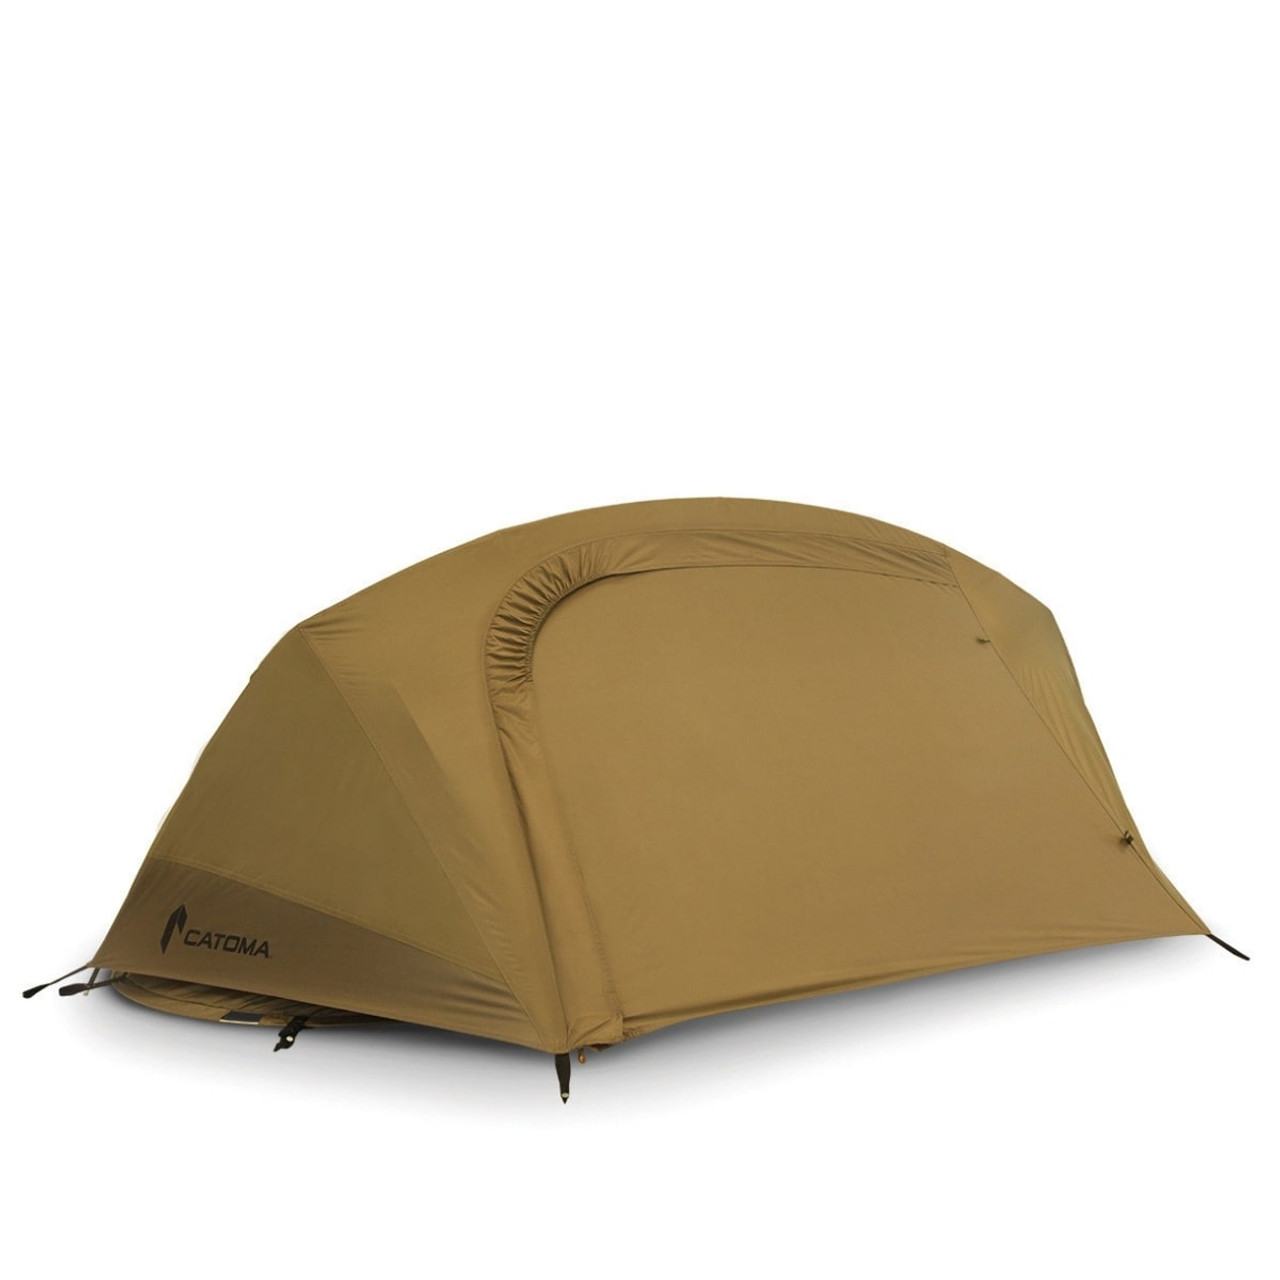 https://cdn11.bigcommerce.com/s-53r83b14/images/stencil/1280x1280/products/23212/114044/Catoma_Improved_Military_Tent_rain_fly_wolverine-min__33441.1652802092.jpg?c=2